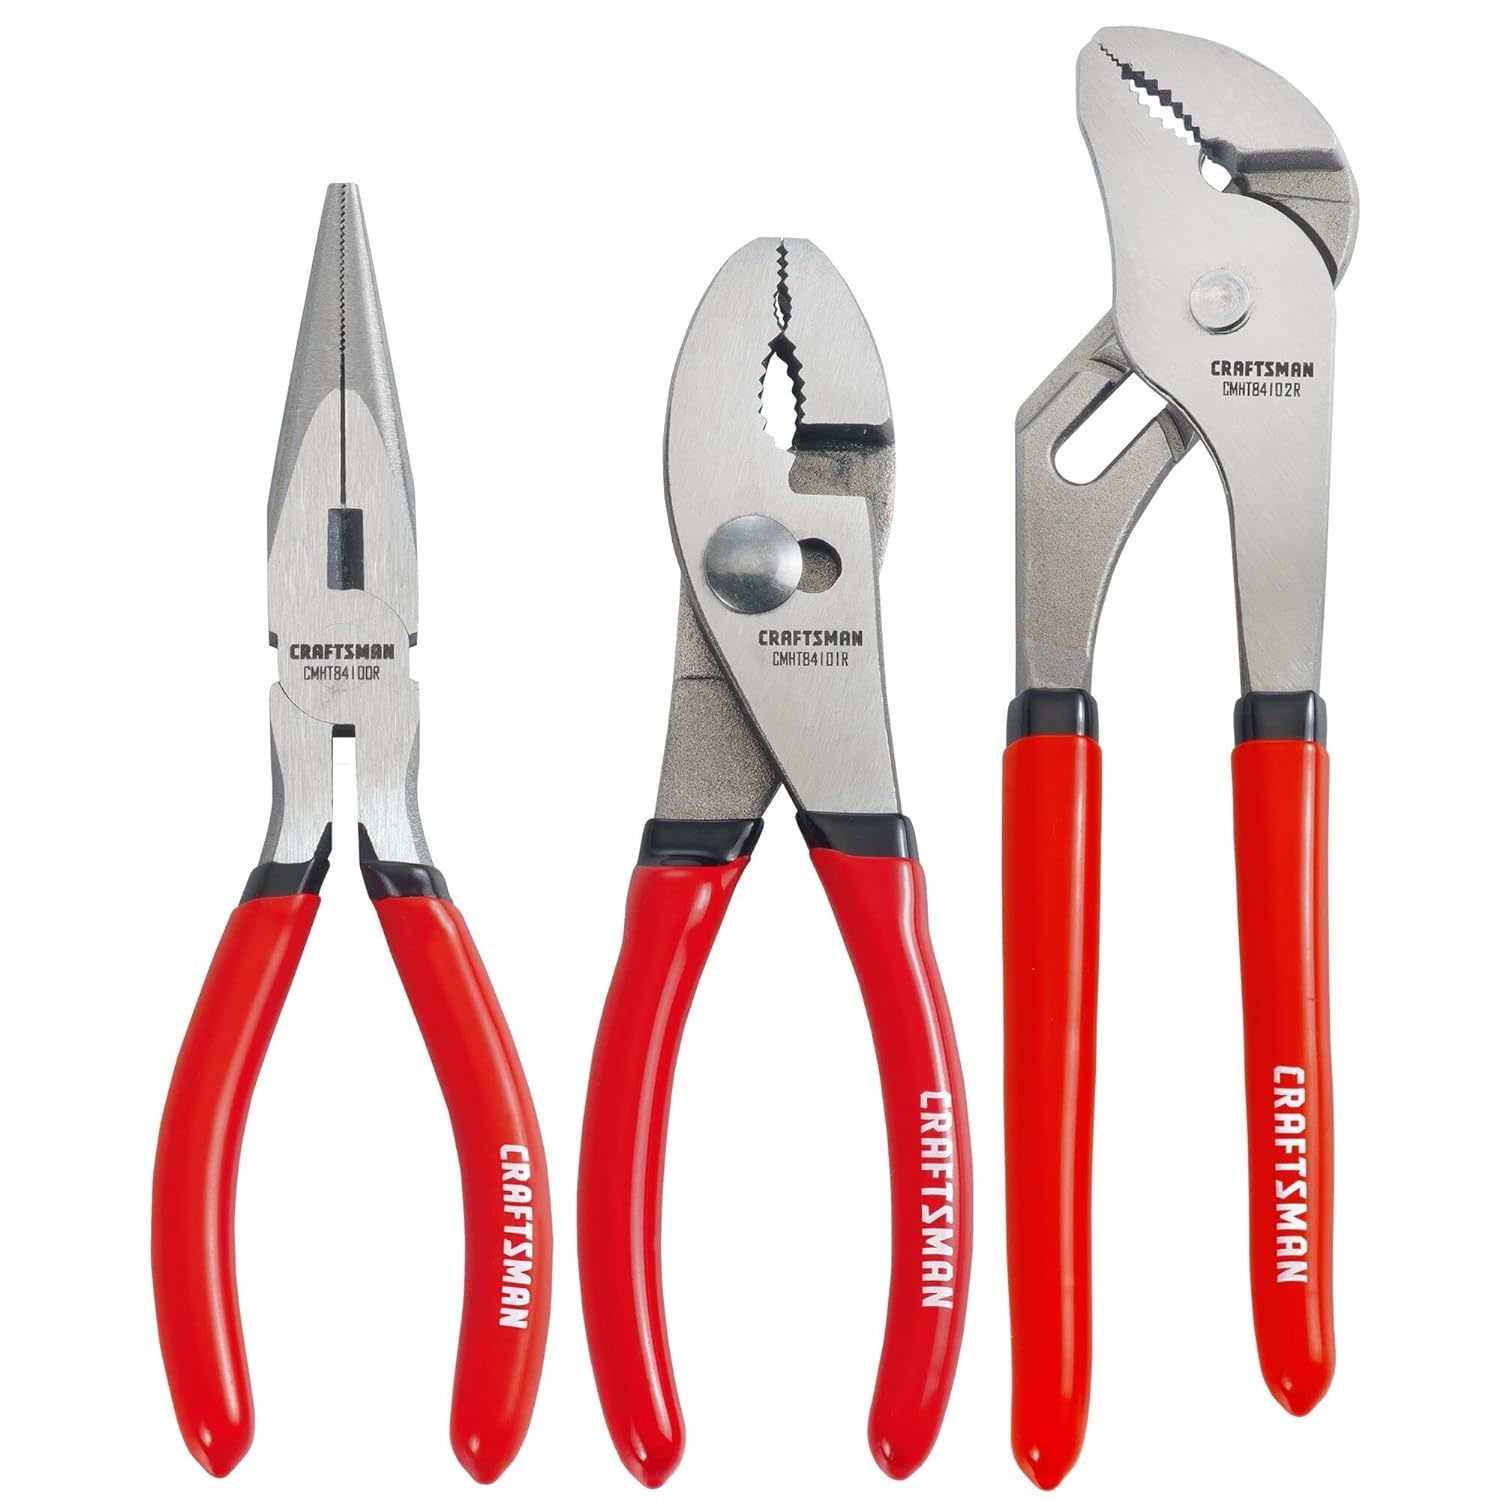 CRAFTSMAN Pliers Set, 3 Piece Set, 6 Inch Long Nose, 6 Inch Slip Joint, 8 Inch G - $42.99